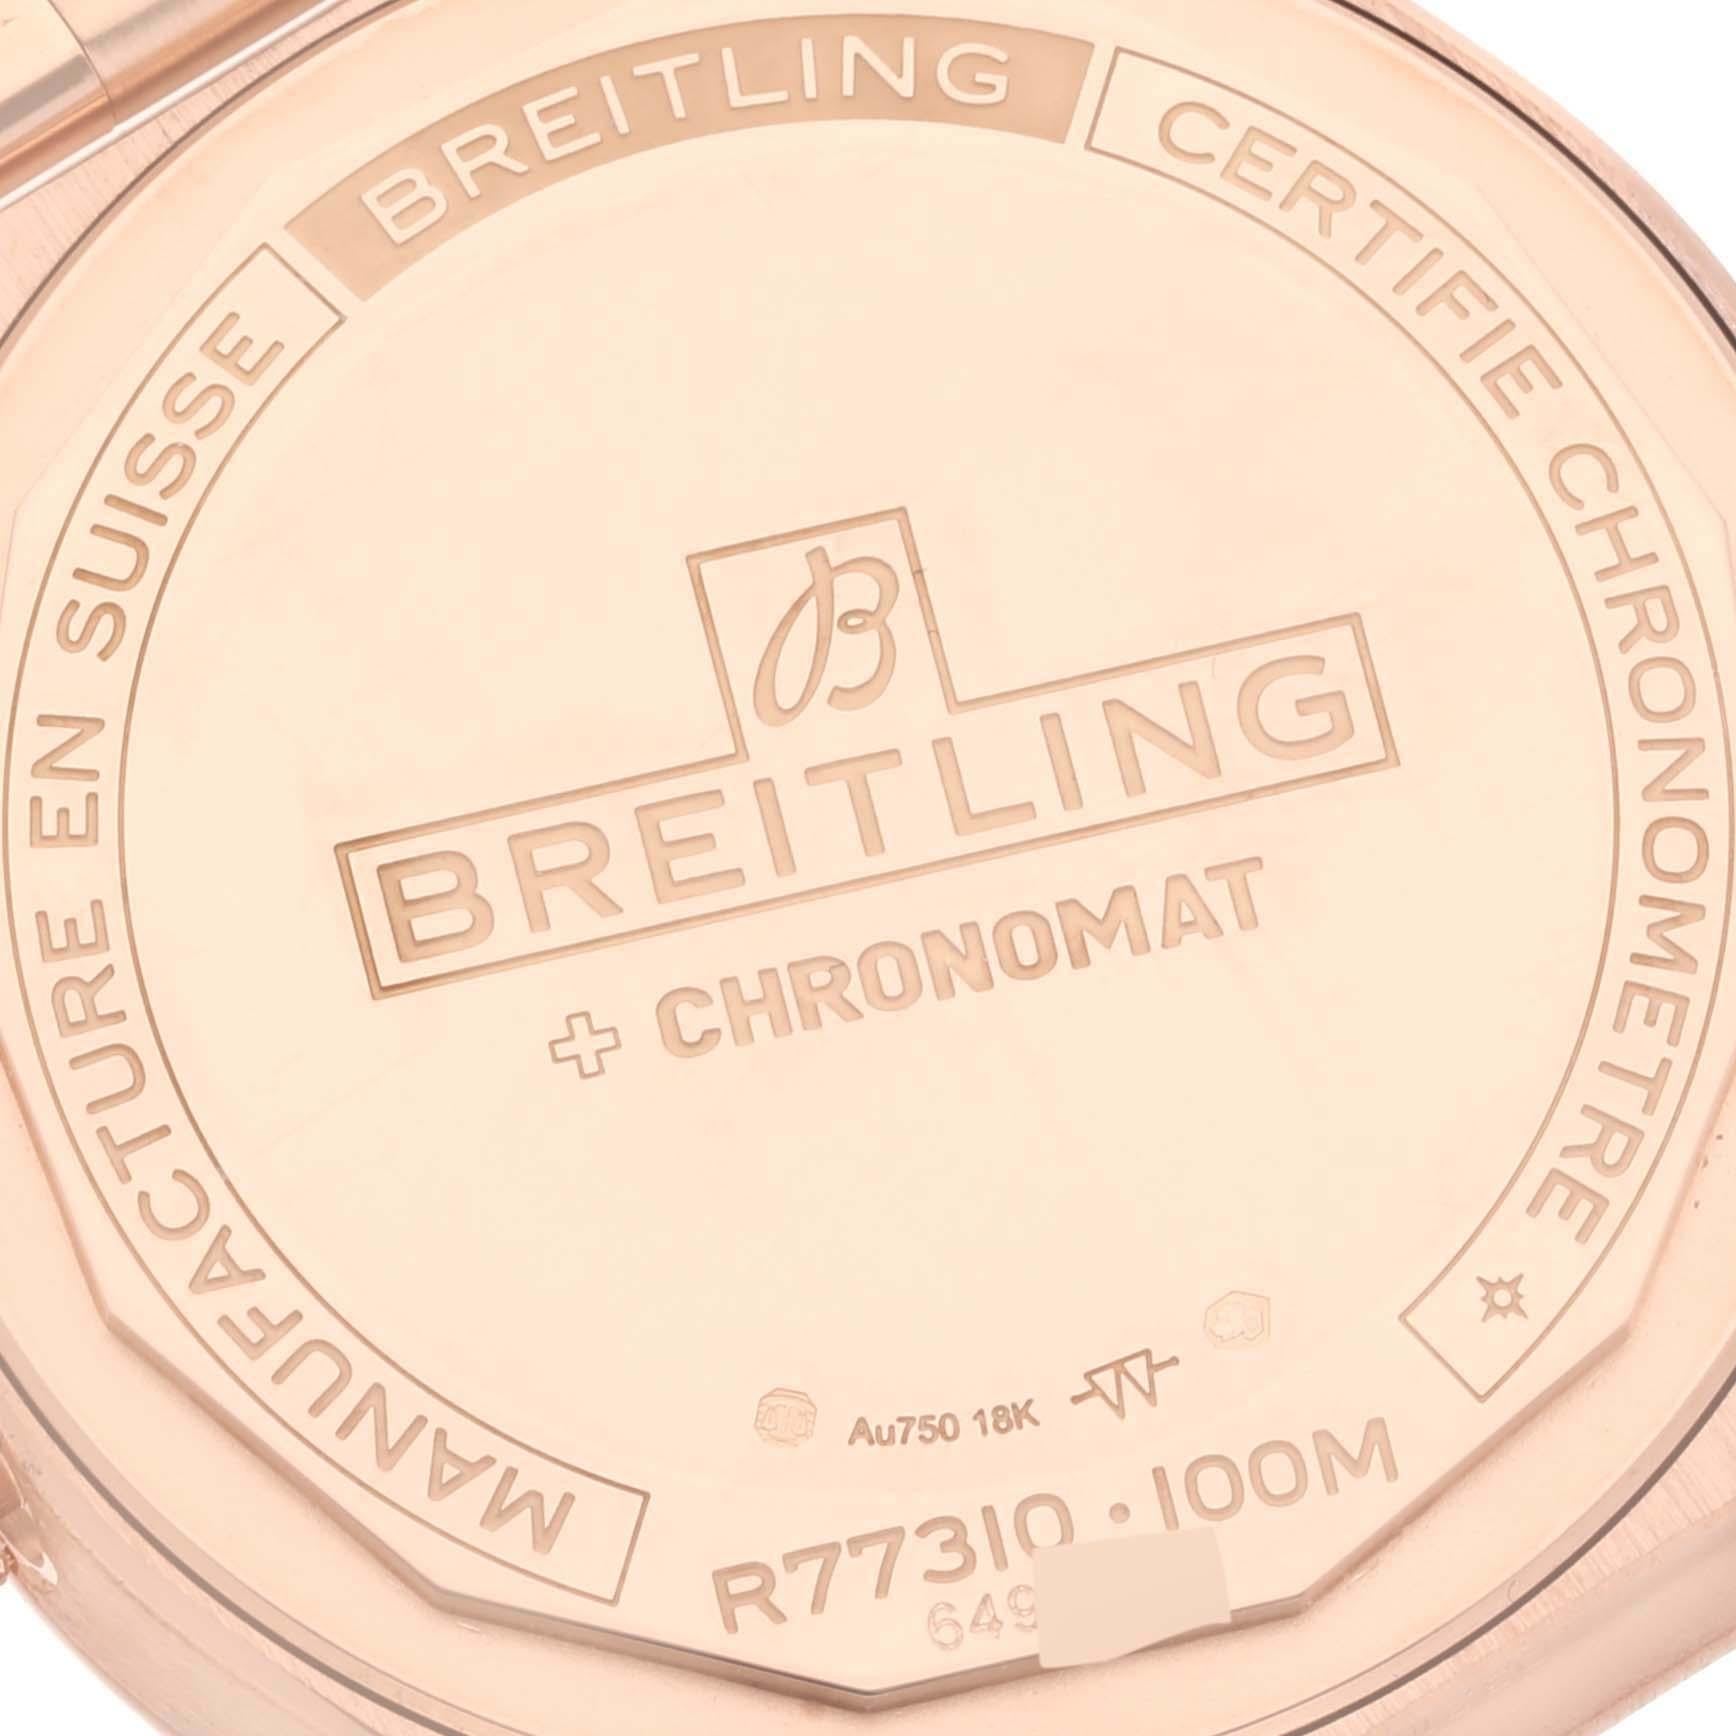 Breitling Chronomat 32 White Dial Rose Gold Ladies Watch R77310 For Sale 4